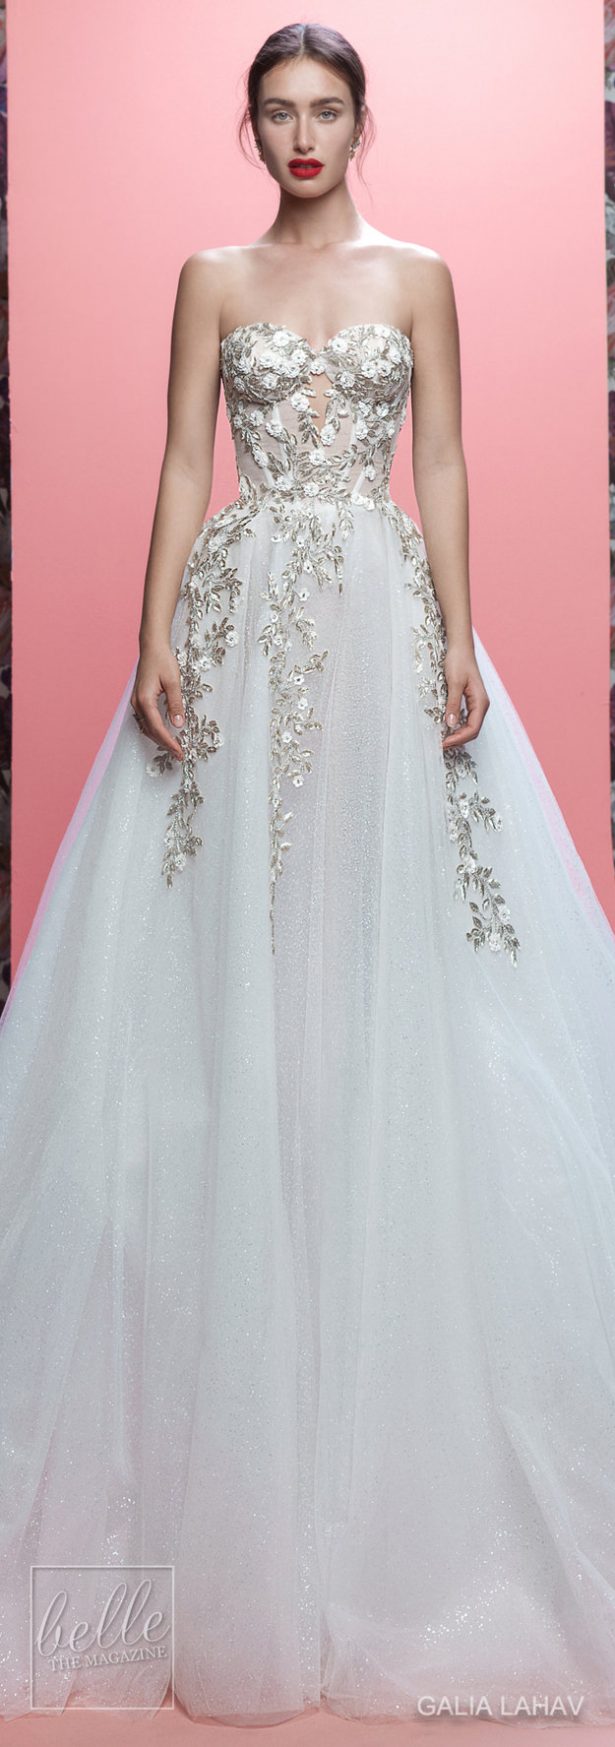 Wedding Dresses By Galia Lahav Couture Bridal Spring 2019 Collection- Queen of Hearts - Aelin